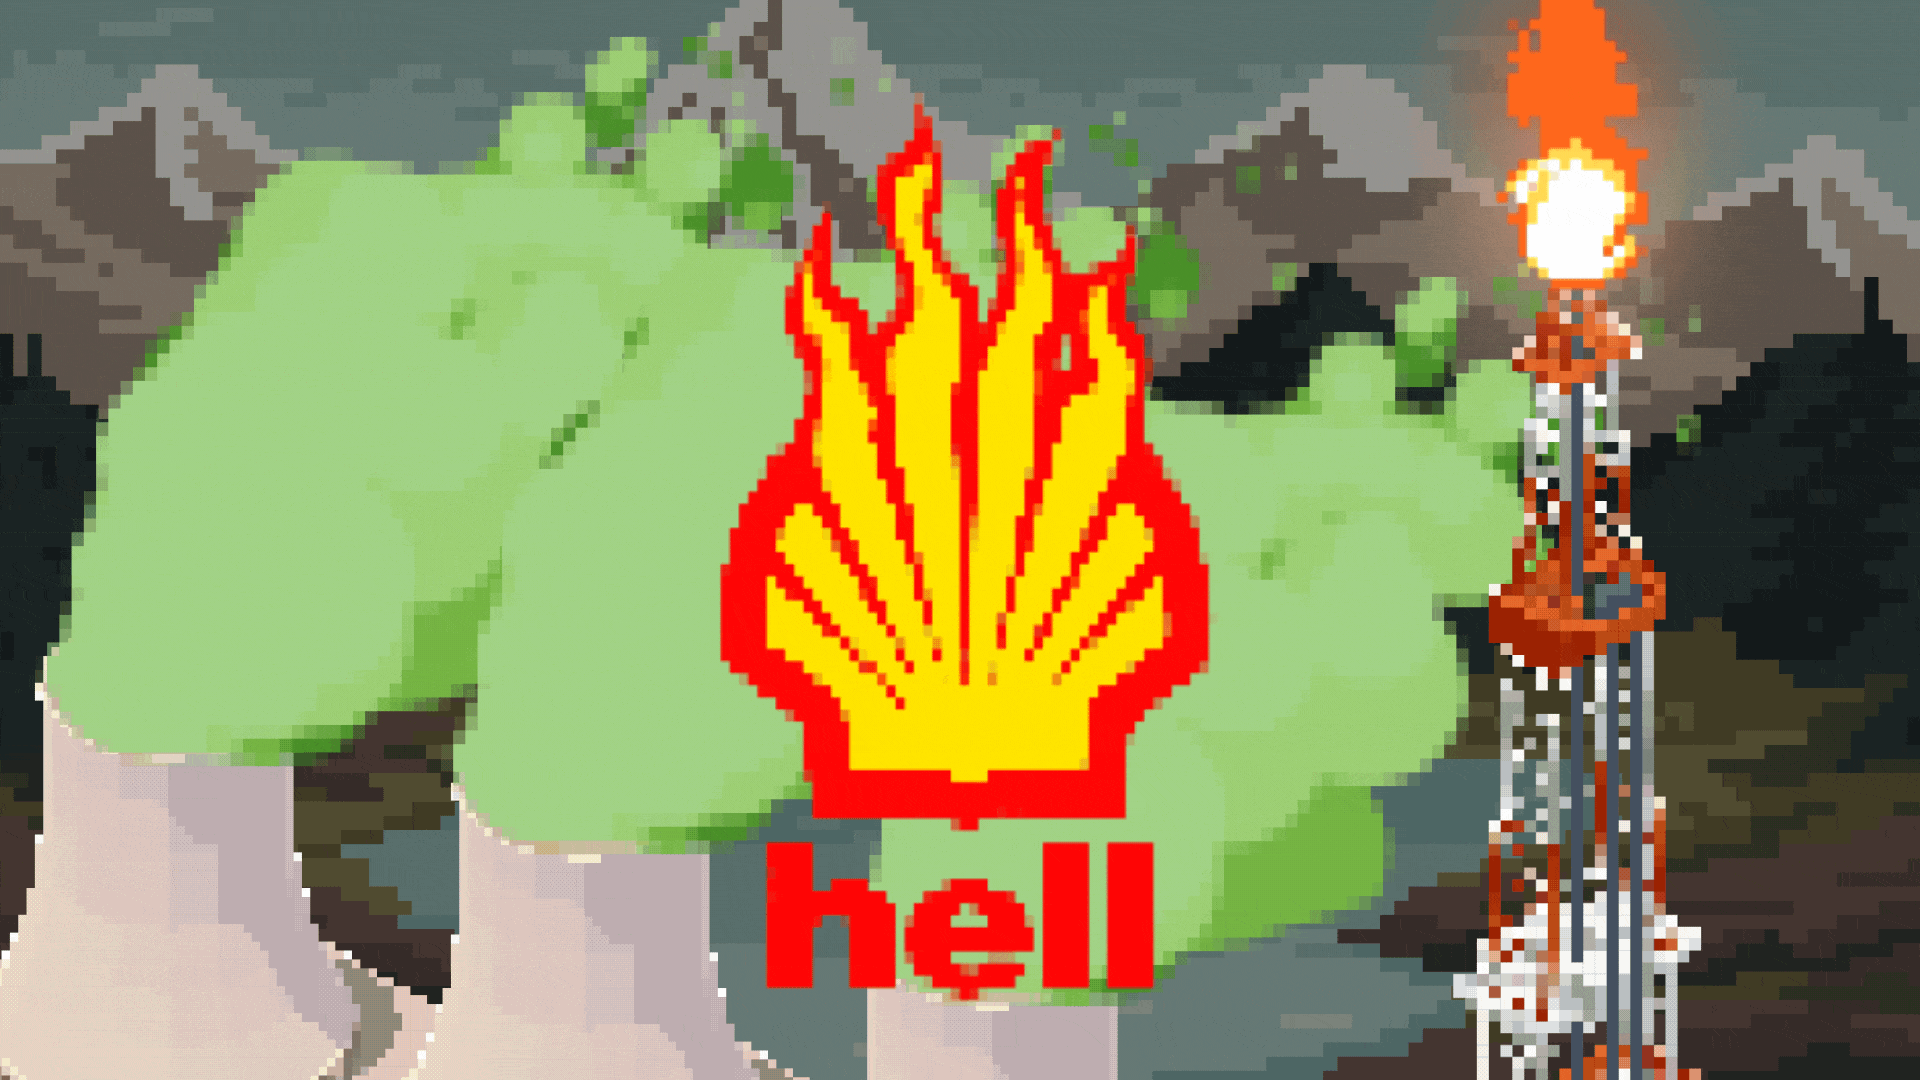 (S)Hell after effects art gif global warming hell pixel pollution shell